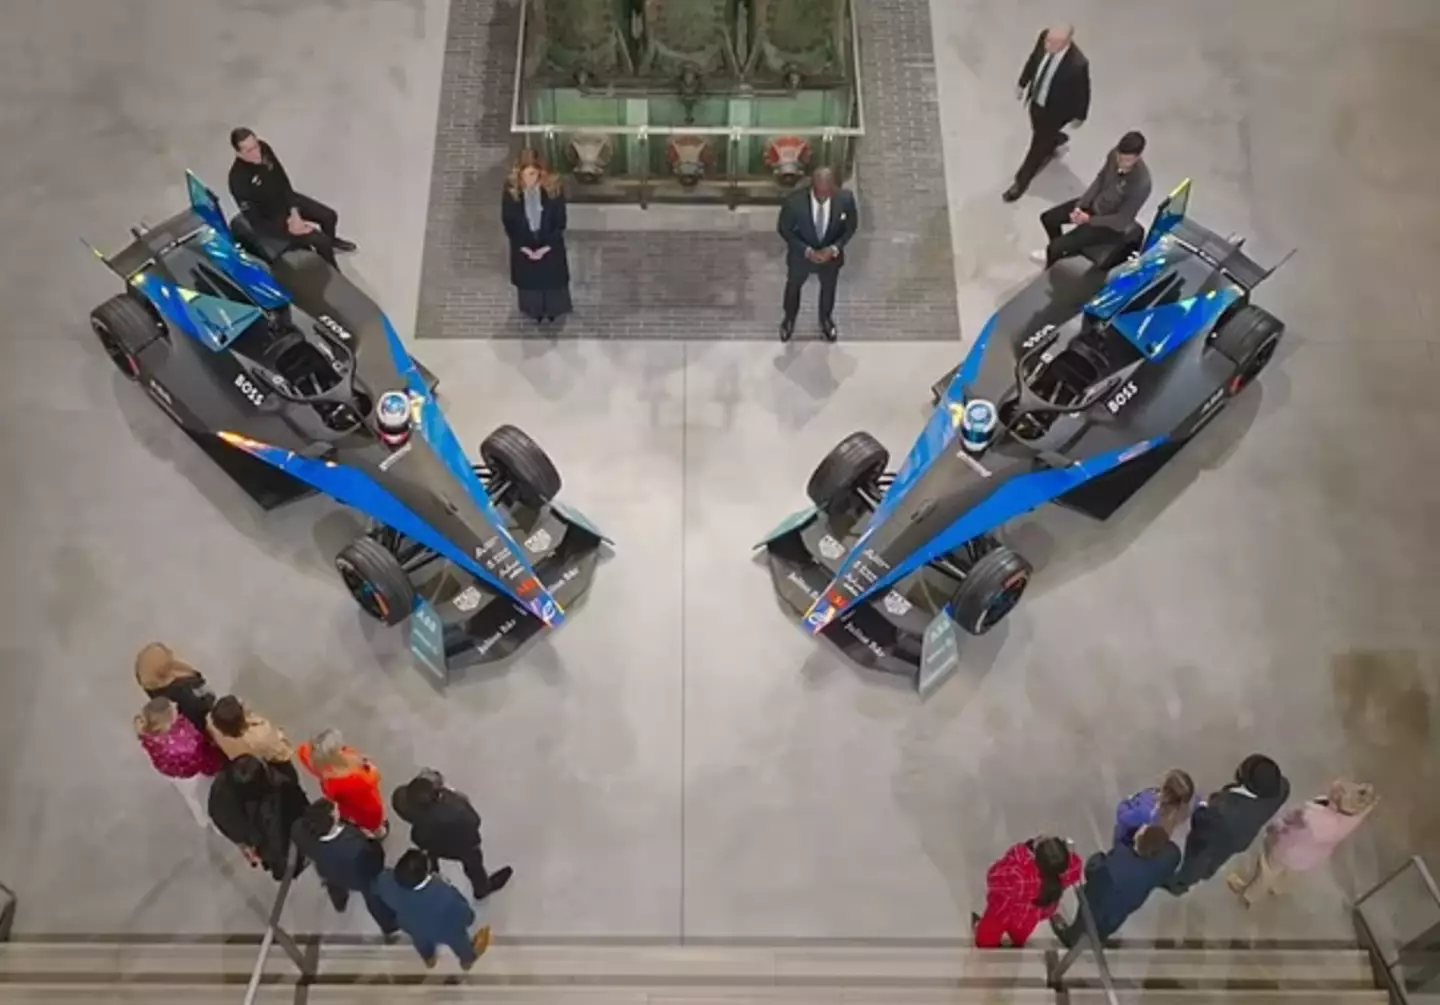 The candidates were tasked with launching a new Formula-E team and pitching it to potential sponsors.